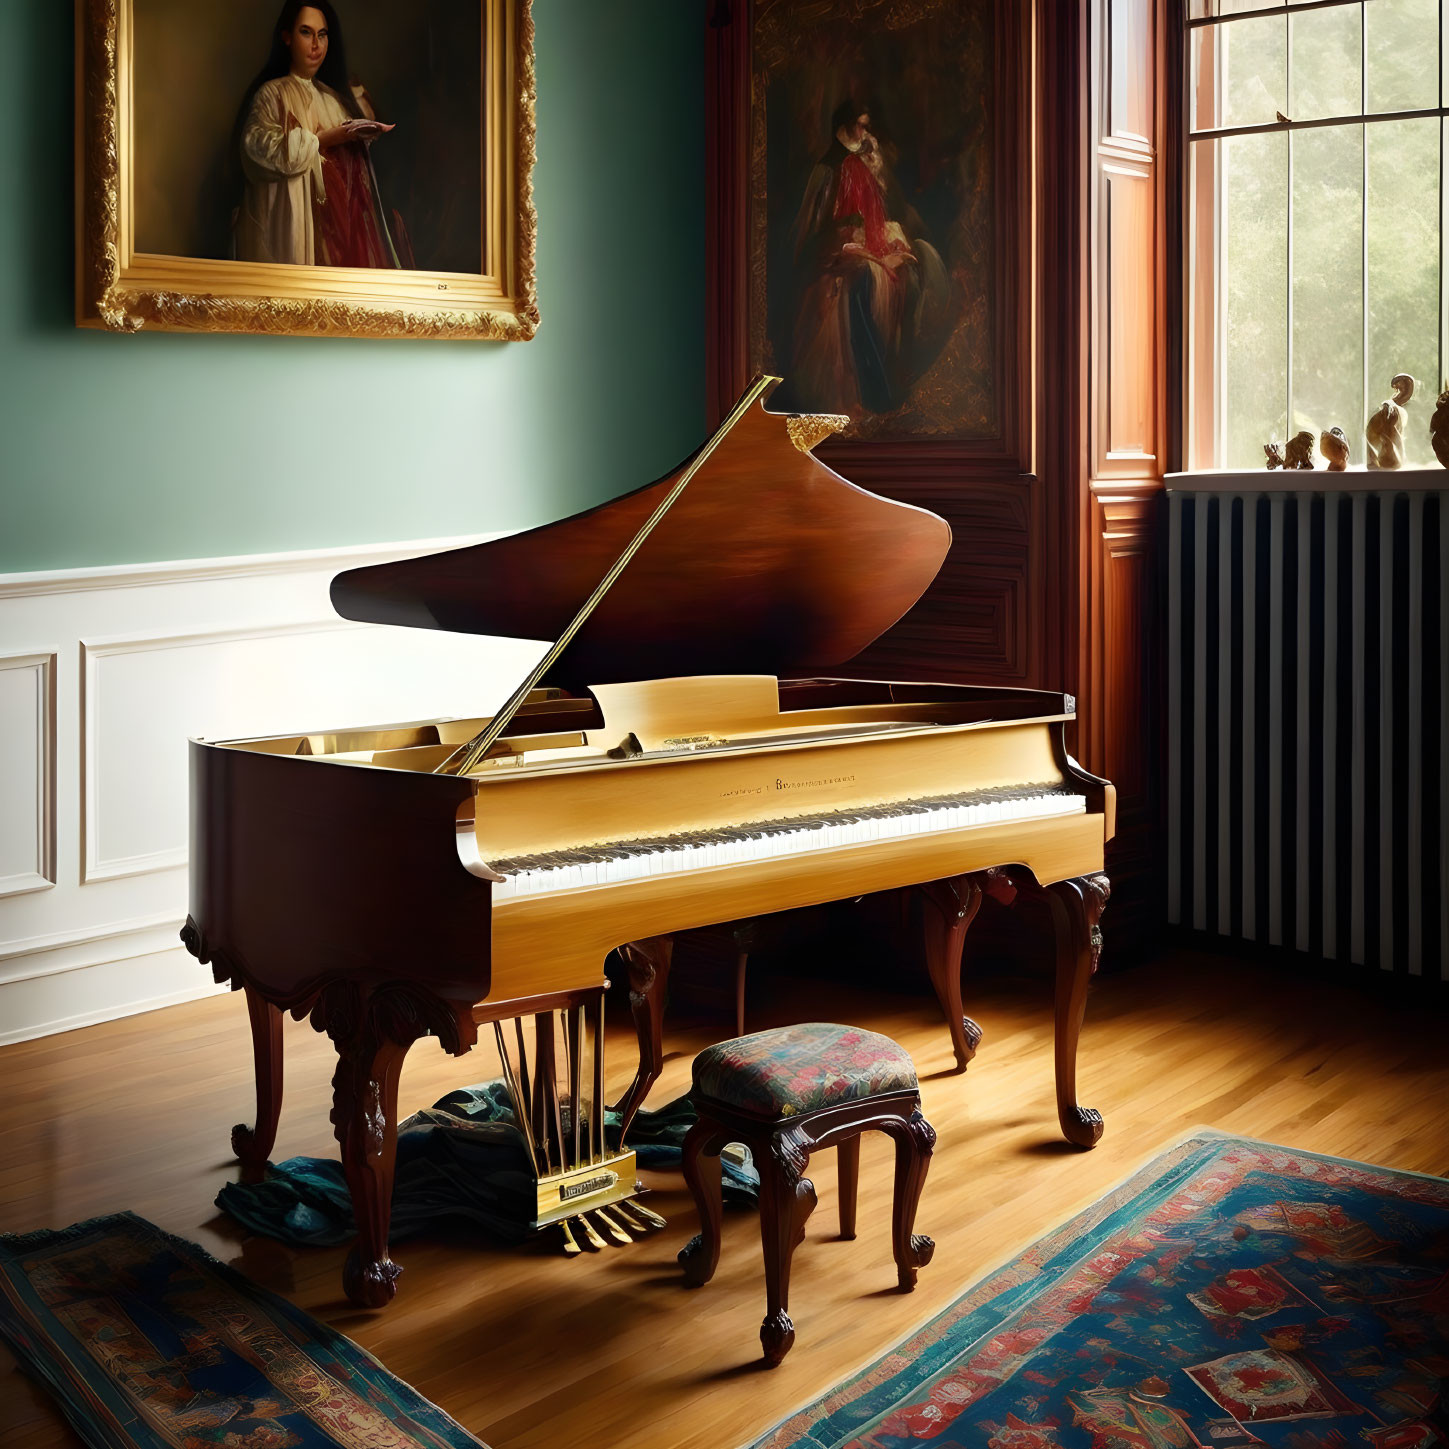 Classic Room with Grand Piano, Wood Flooring, Paintings, Carpet, Window, and Patterned St